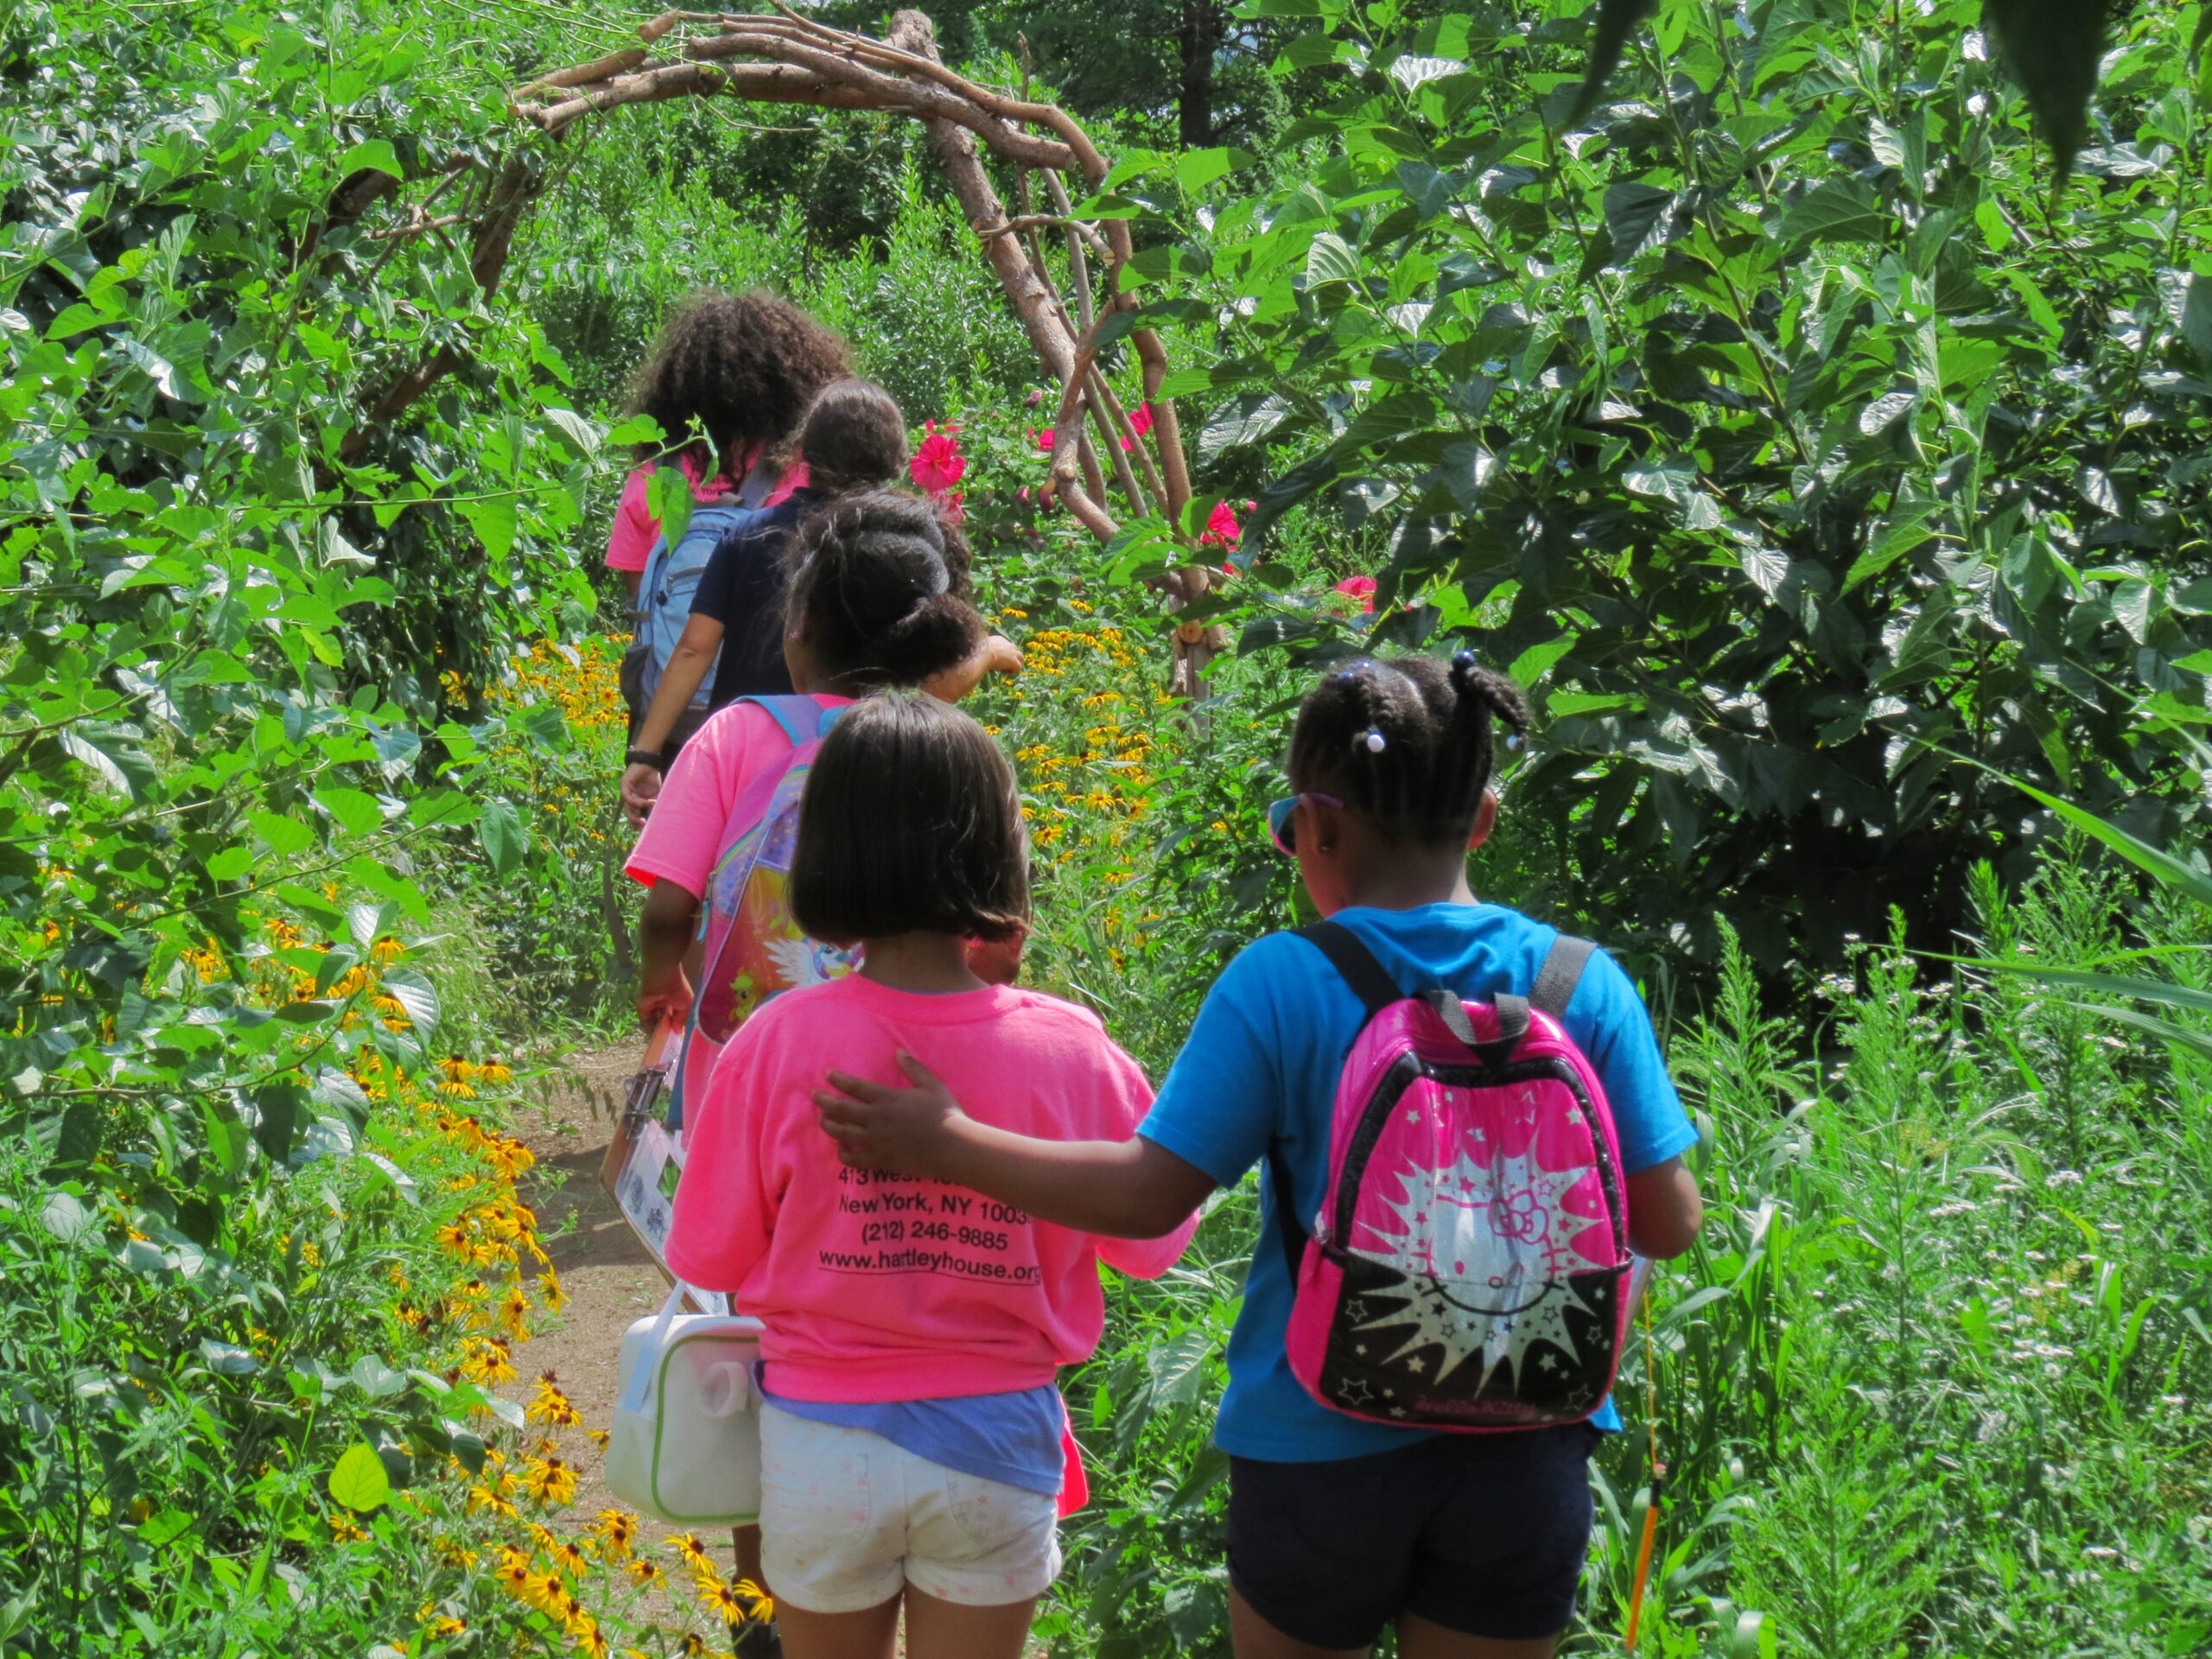 A group of students on a Nature Walk through Hudson River Park's Habitat Garden. One student has their hand on another's back to support them.